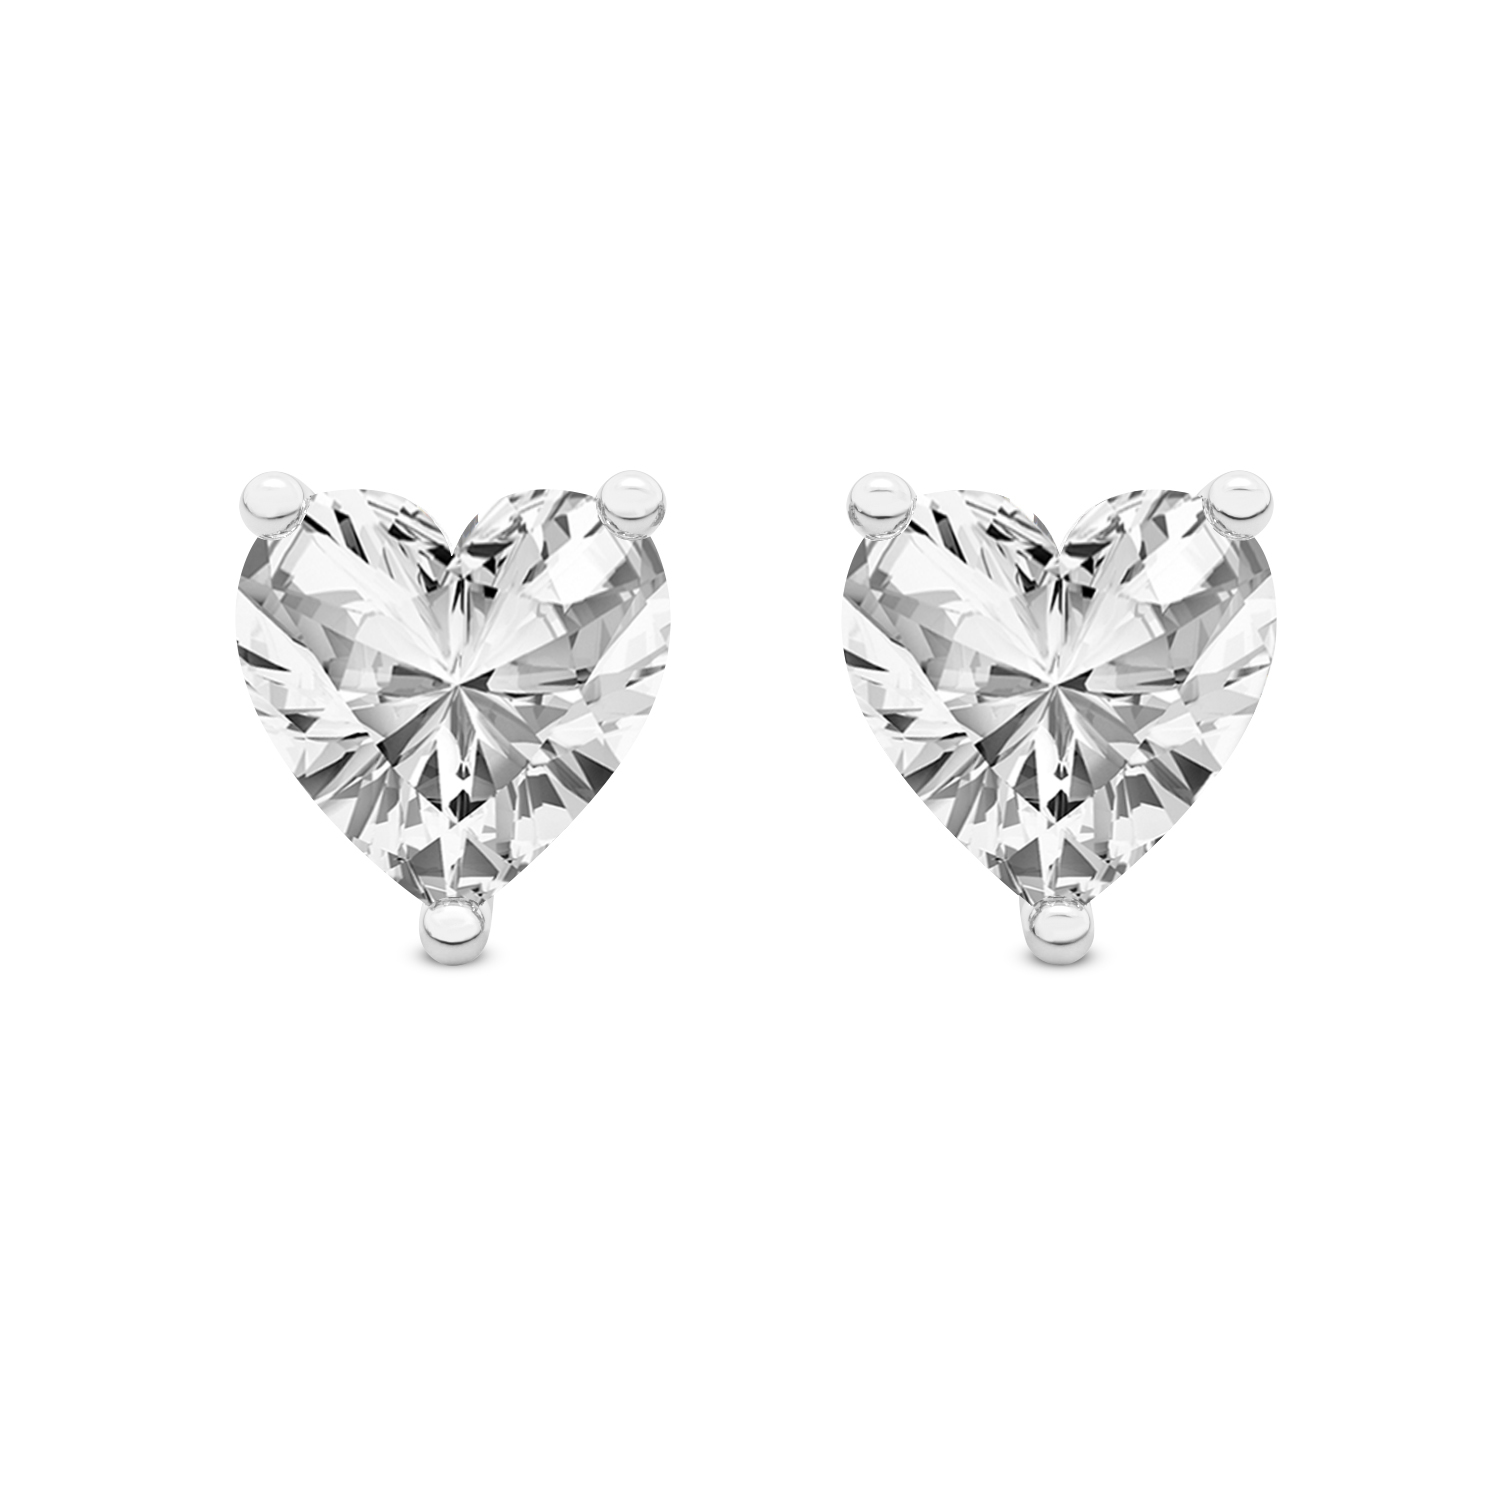 3 Prong Heart Lab Diamond Stud Earrings white gold earring, small front view